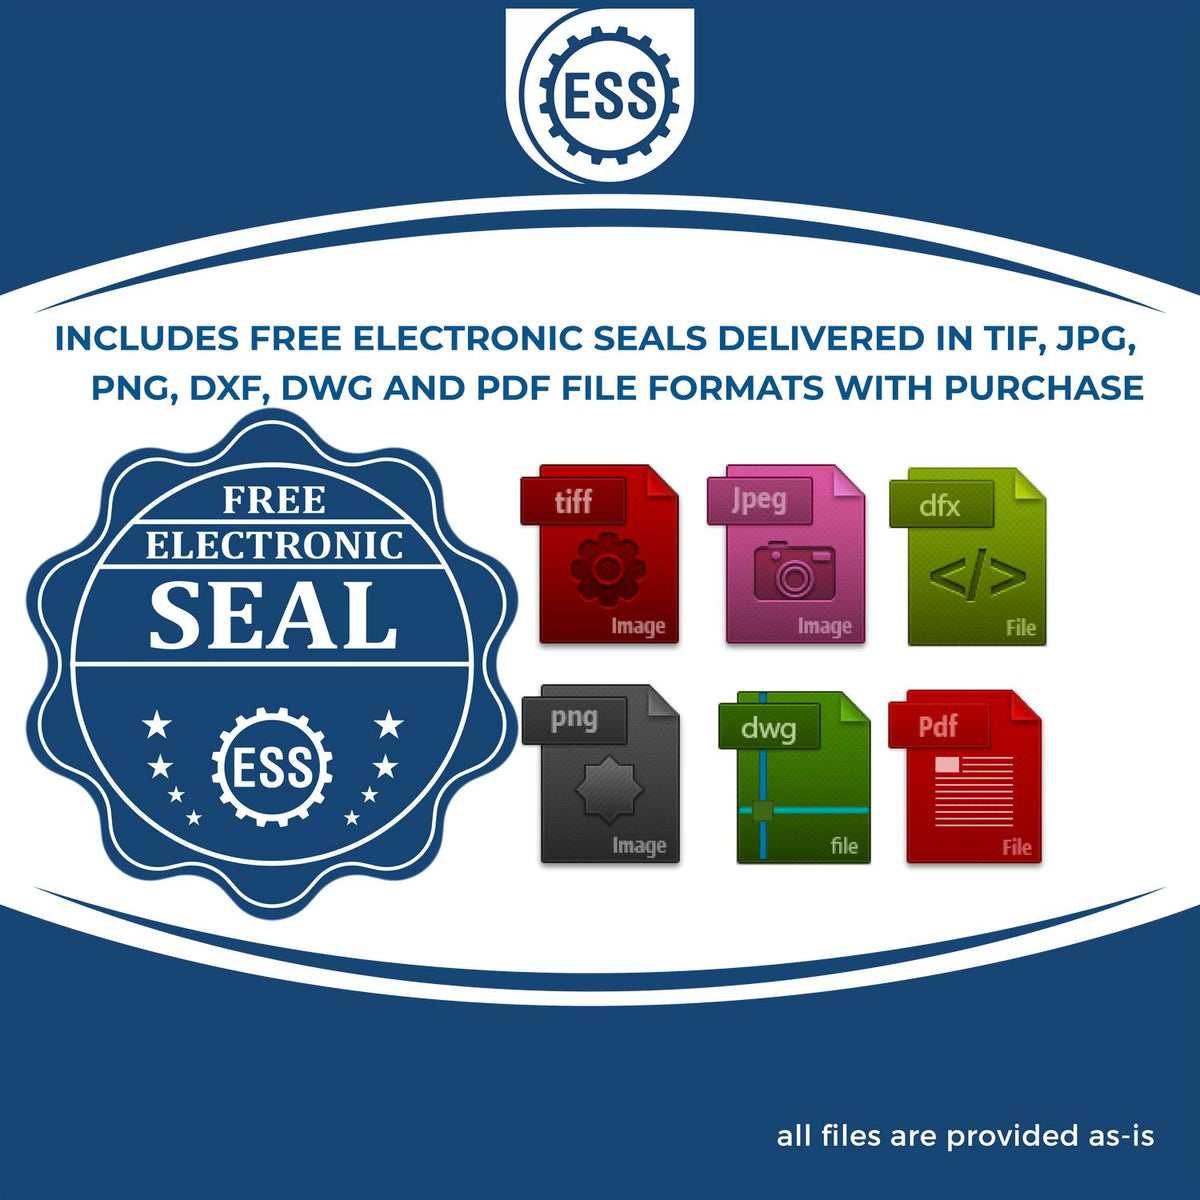 An infographic for the free electronic seal for the MaxLight Premium Pre-Inked Louisiana State Seal Notarial Stamp illustrating the different file type icons such as DXF, DWG, TIF, JPG and PNG.